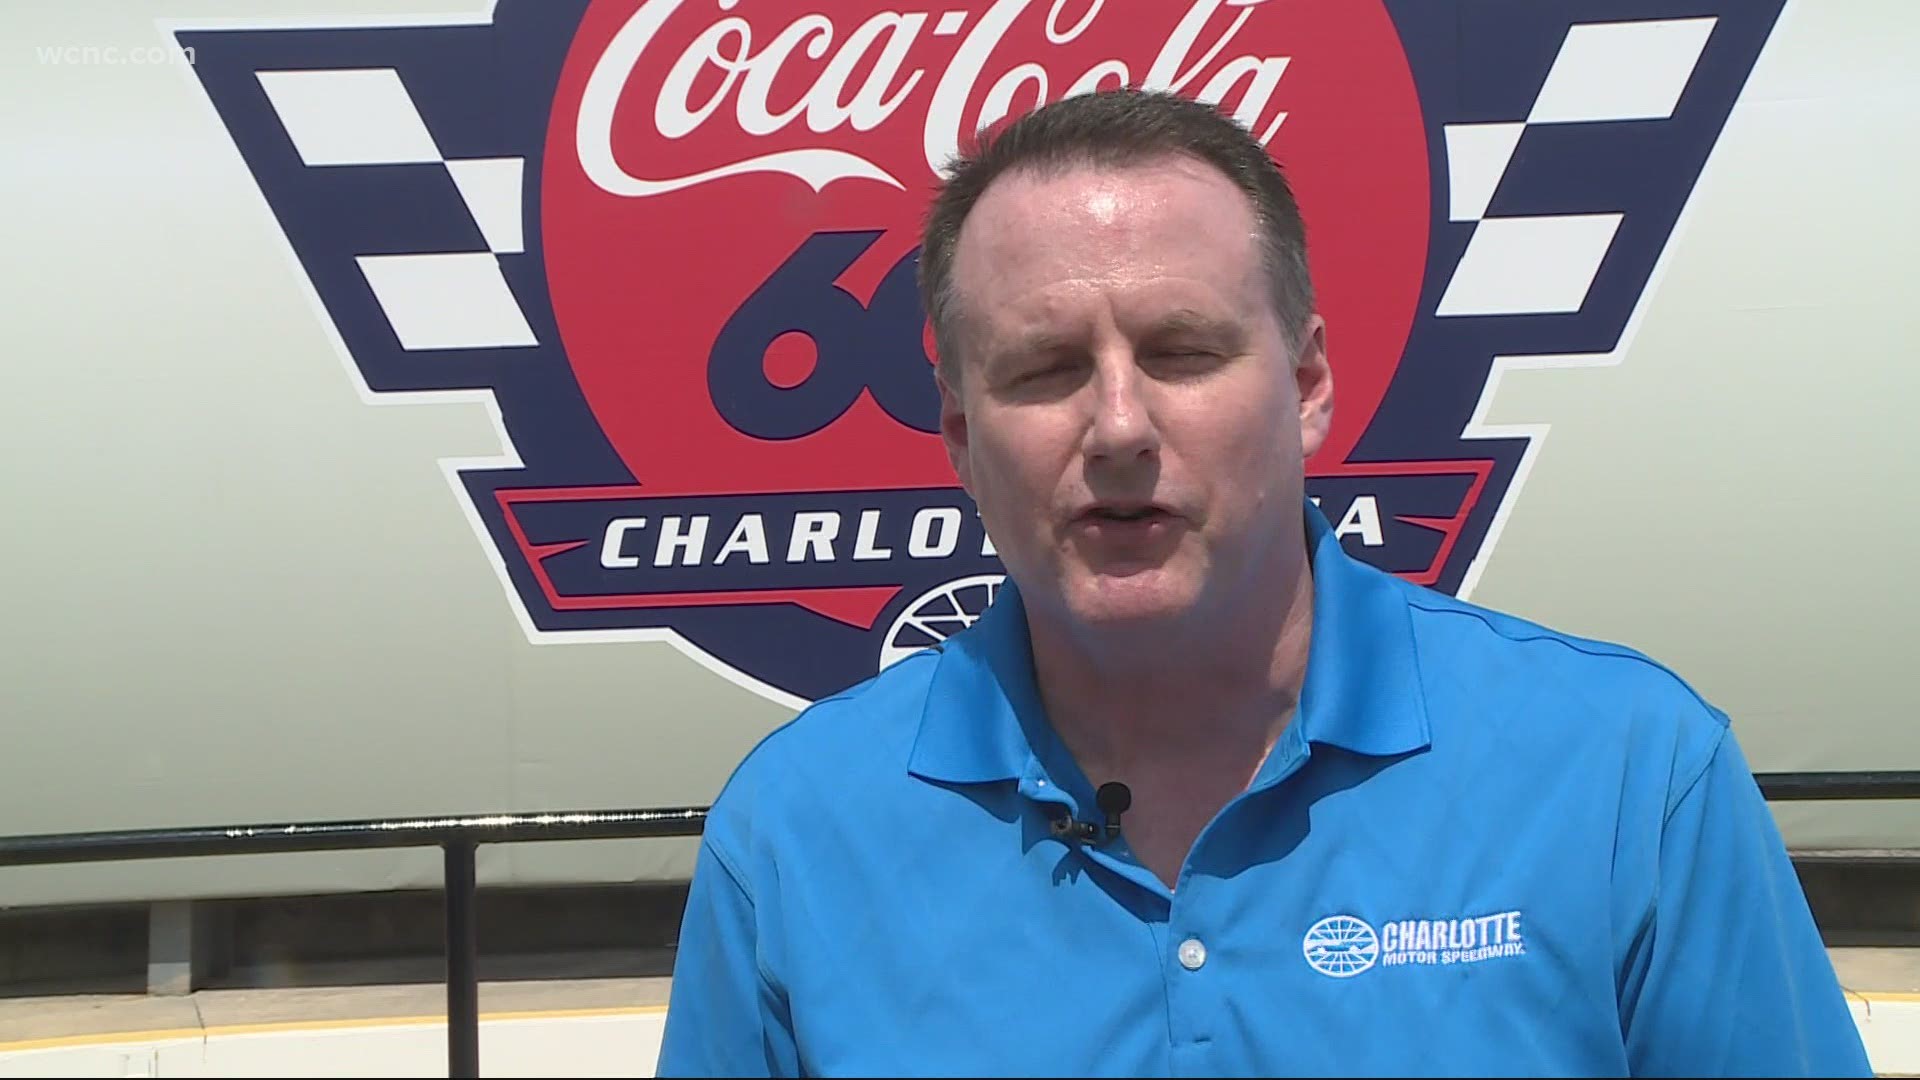 NASCAR gear up for the Coca-Cola 600 on Sunday wcnc